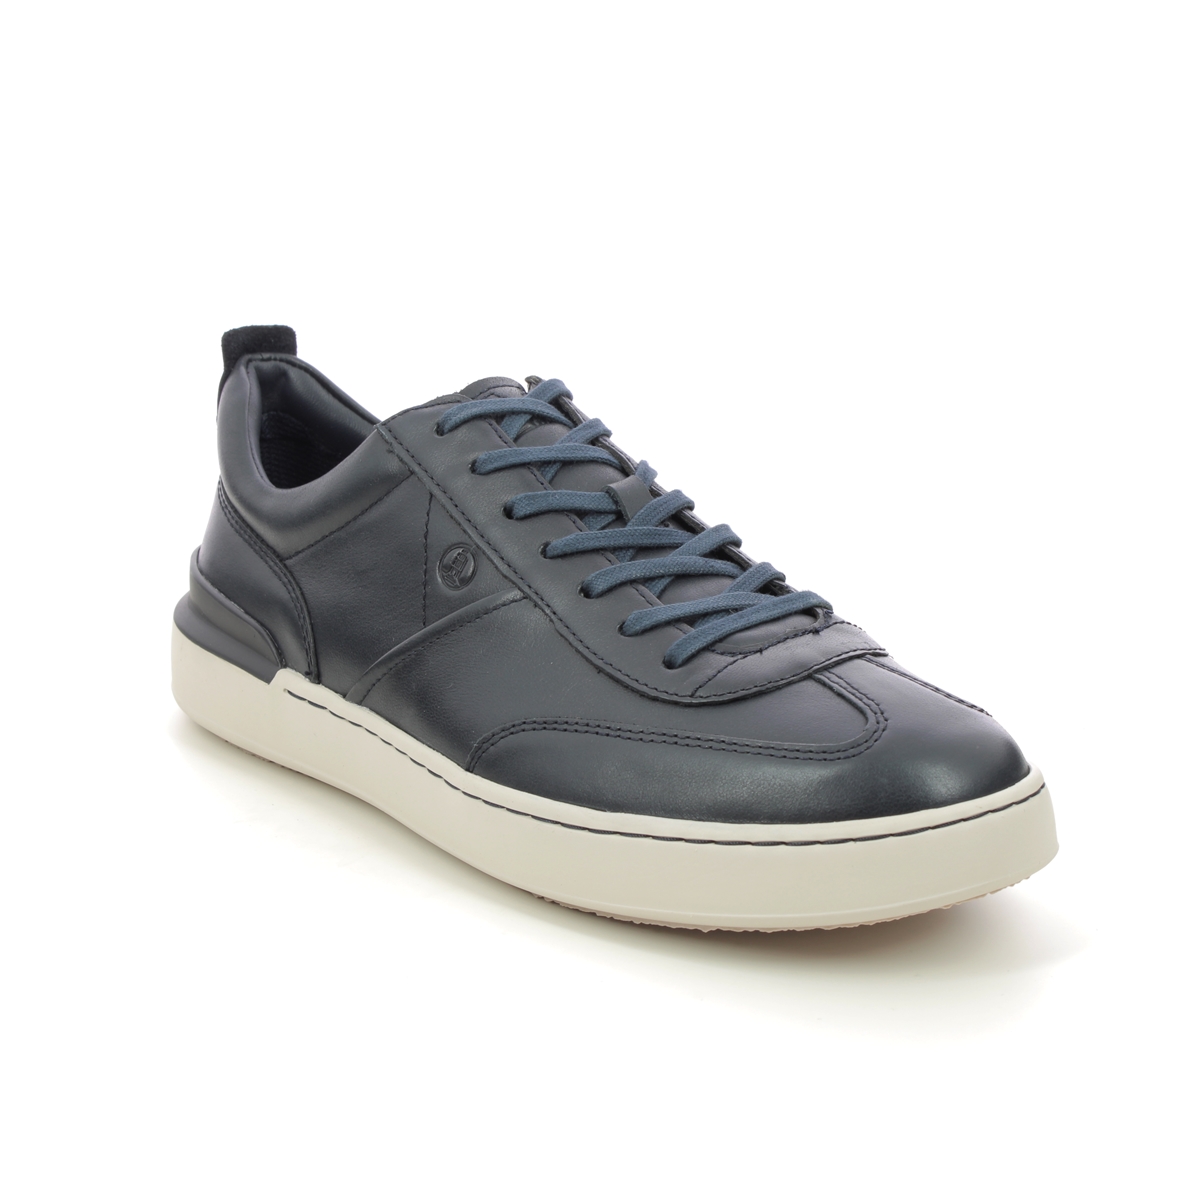 Clarks Courtlite Mode Navy Leather Mens Trainers 734747G In Size 10 In Plain Navy Leather G Width Fitting